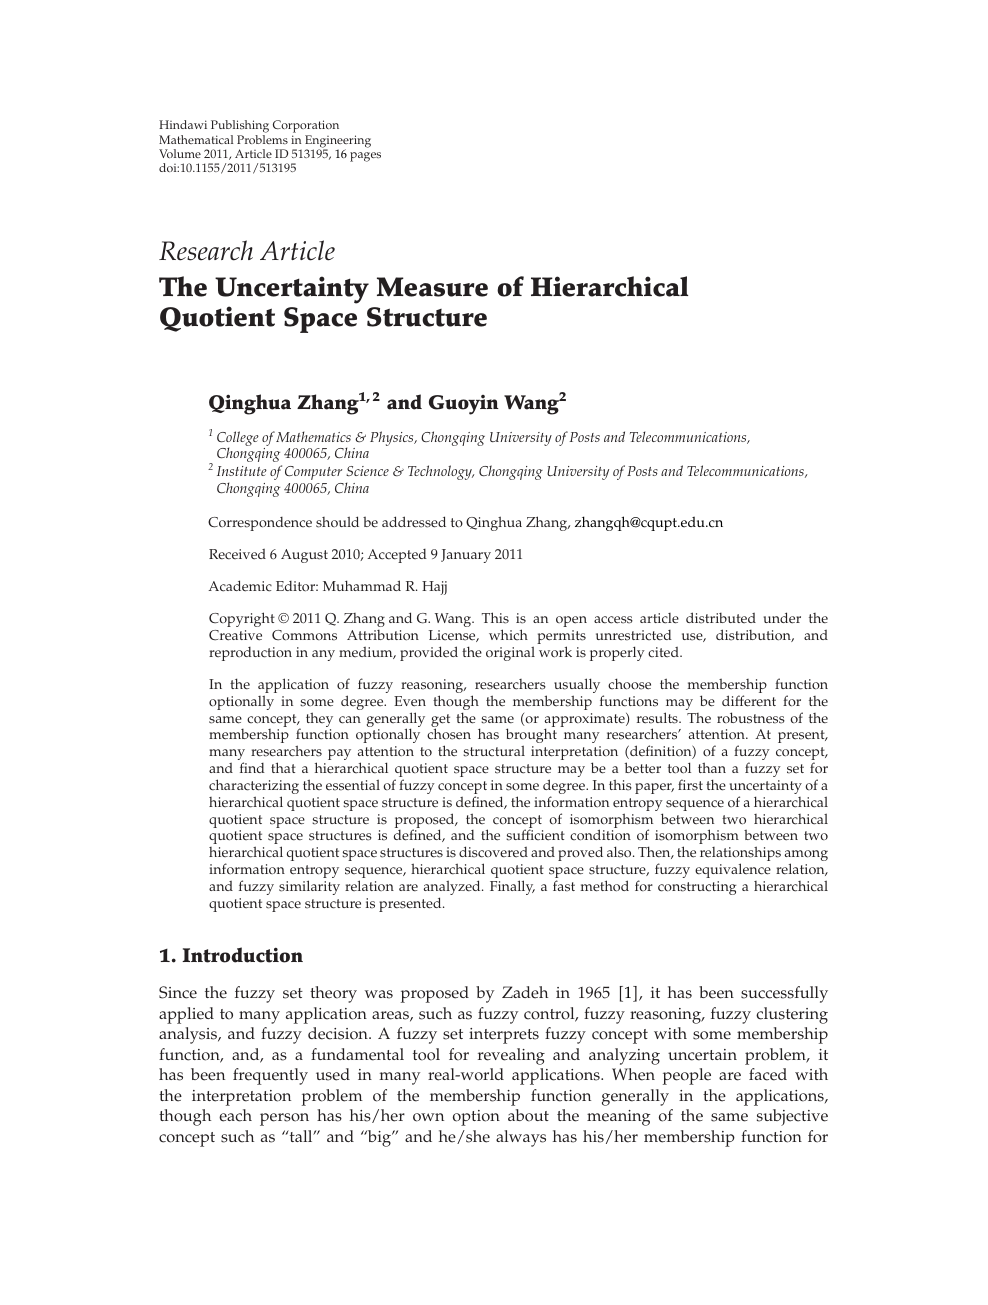 The Uncertainty Measure Of Hierarchical Quotient Space Structure Topic Of Research Paper In Mathematics Download Scholarly Article Pdf And Read For Free On Cyberleninka Open Science Hub